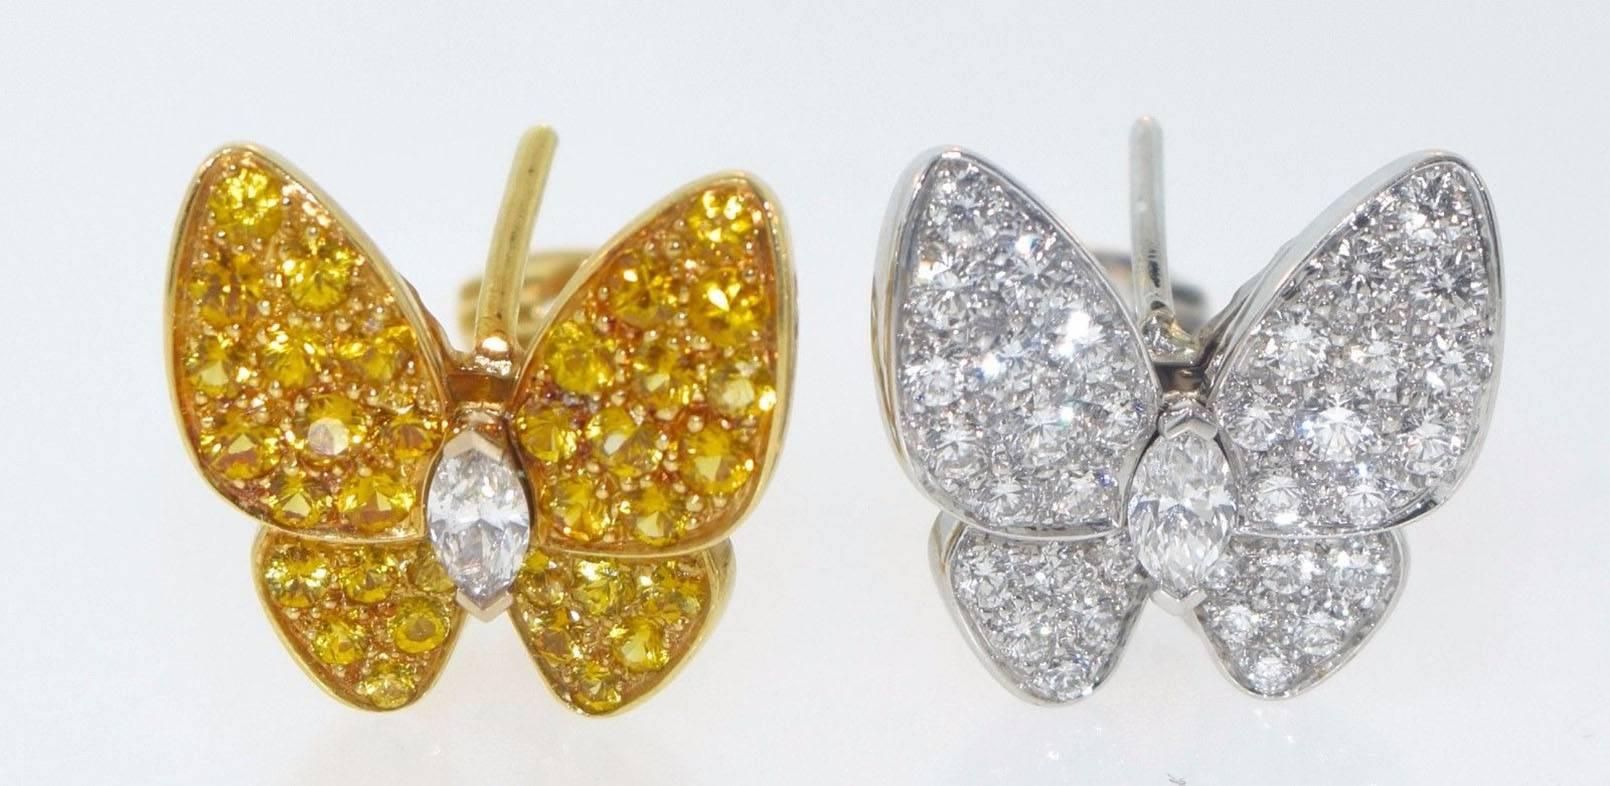 Metal: 18k Yellow Gold, 18k White Gold
Stones: Pave Round Yellow Sapphires with a Marquise-Shaped Diamond Center and Pave Round Diamonds with a marquise-shaped Diamond
Designer: Van Cleef & Arpels
Collection: Two Butterfly
Hallmark: VCA,